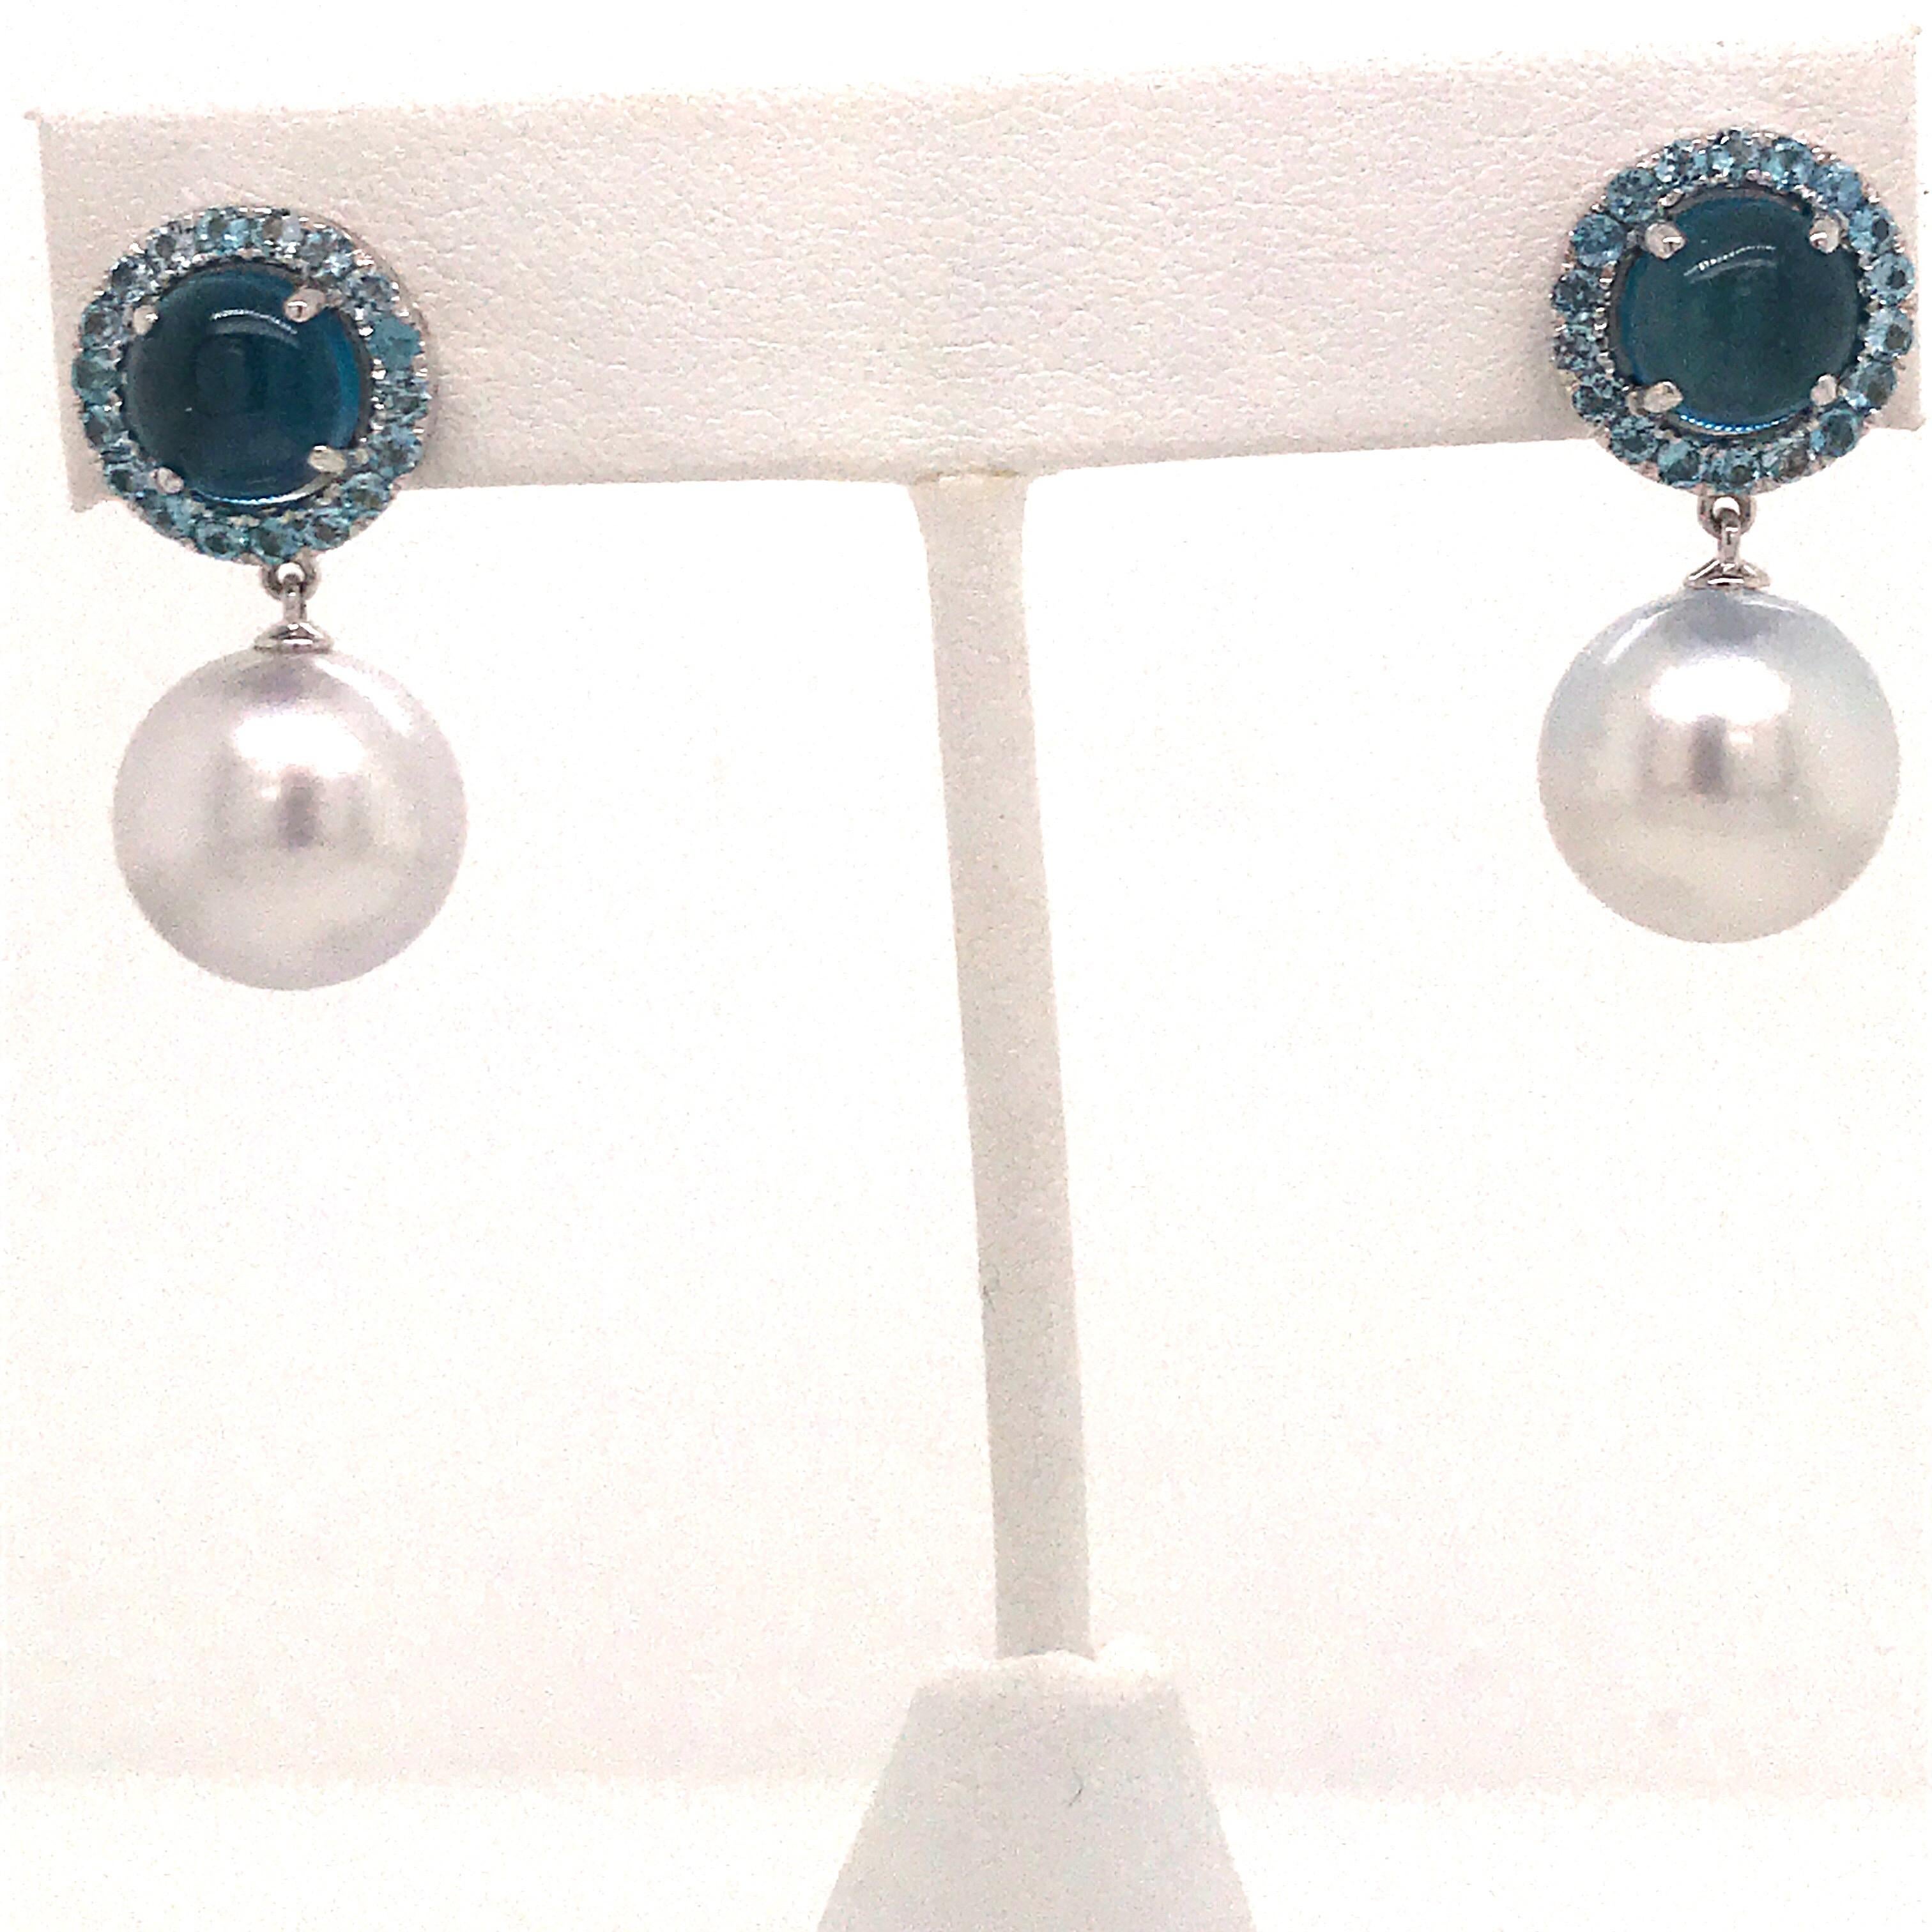 18K White gold drop earrings featuring Blue Topaz weighing 6 carats and two South Sea Pearls measuring 12-13 mm. 